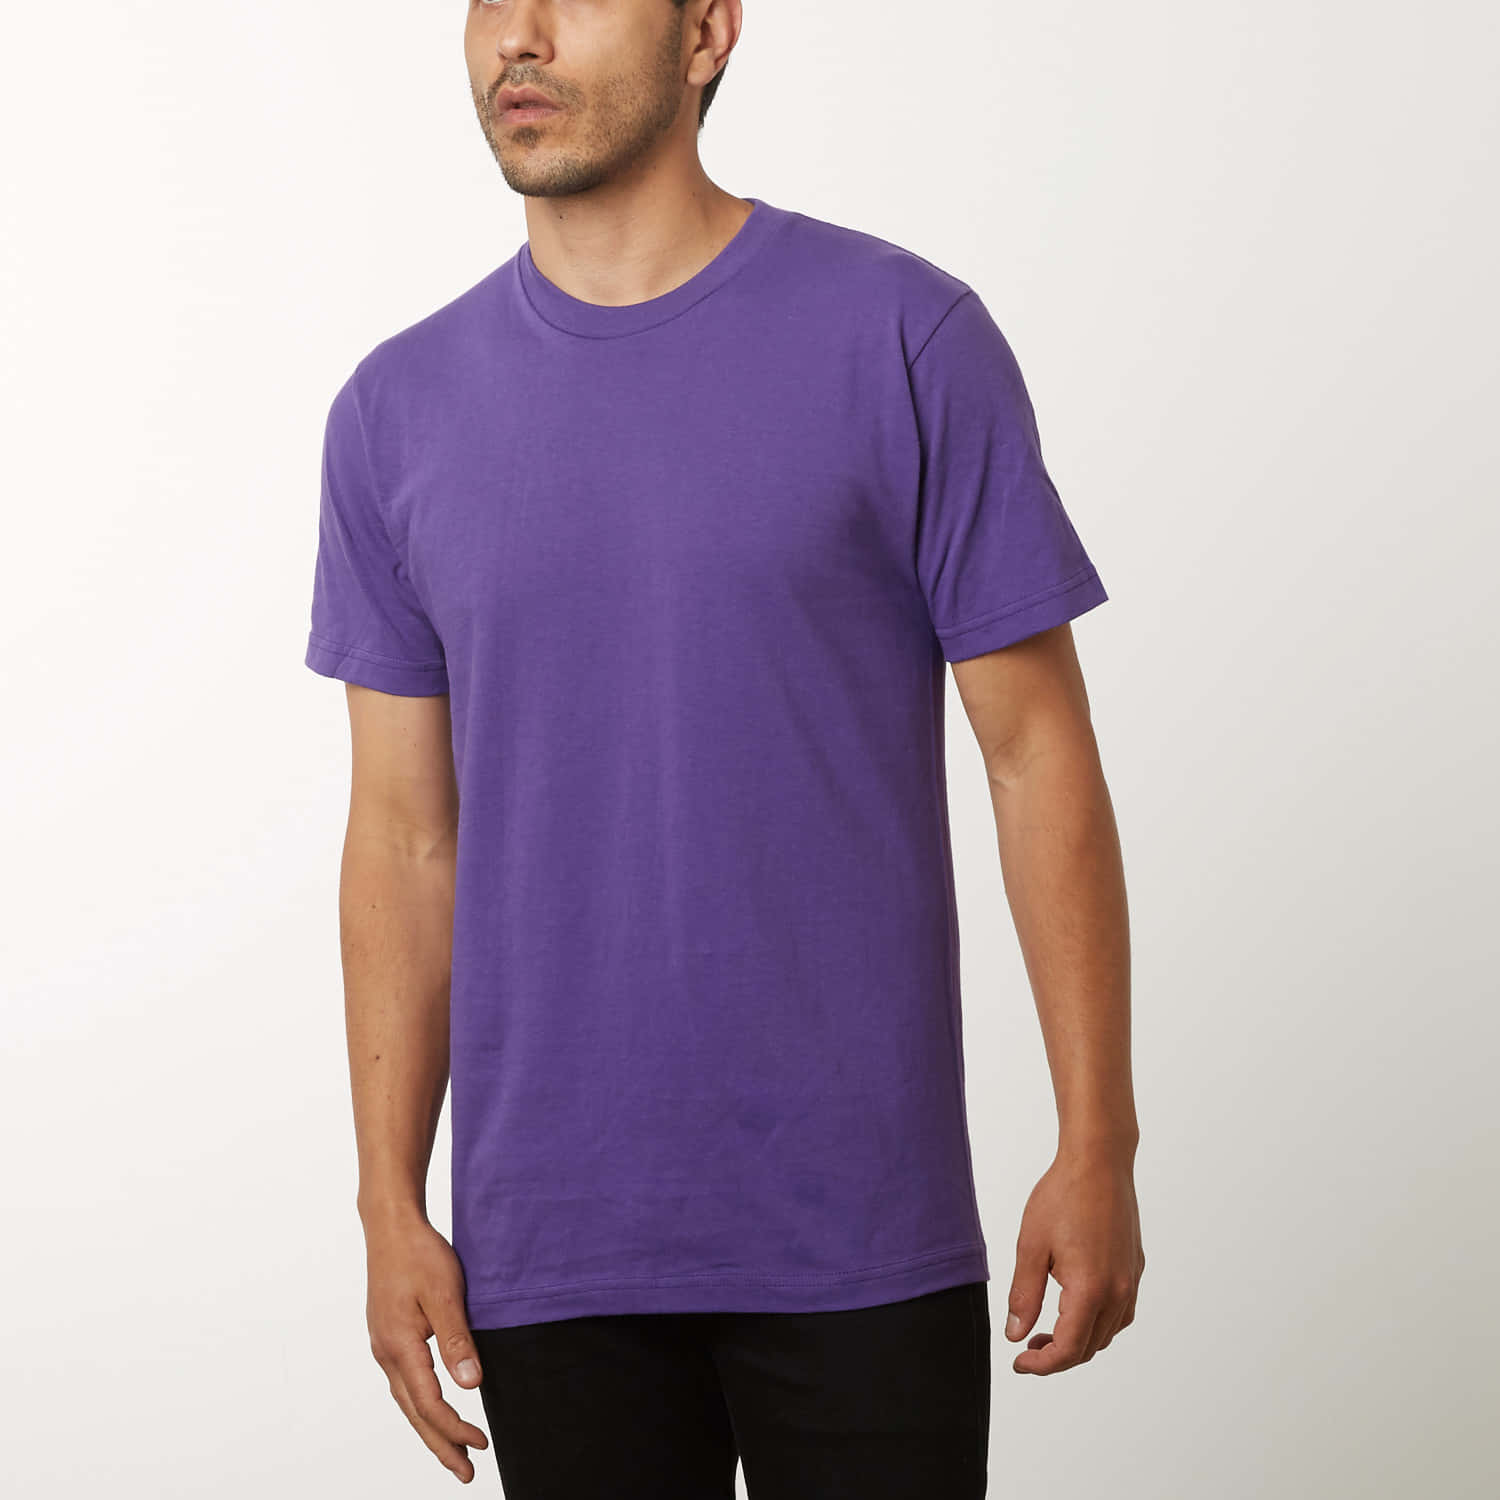 A stylish purple shirt for any occasion. Wallpaper